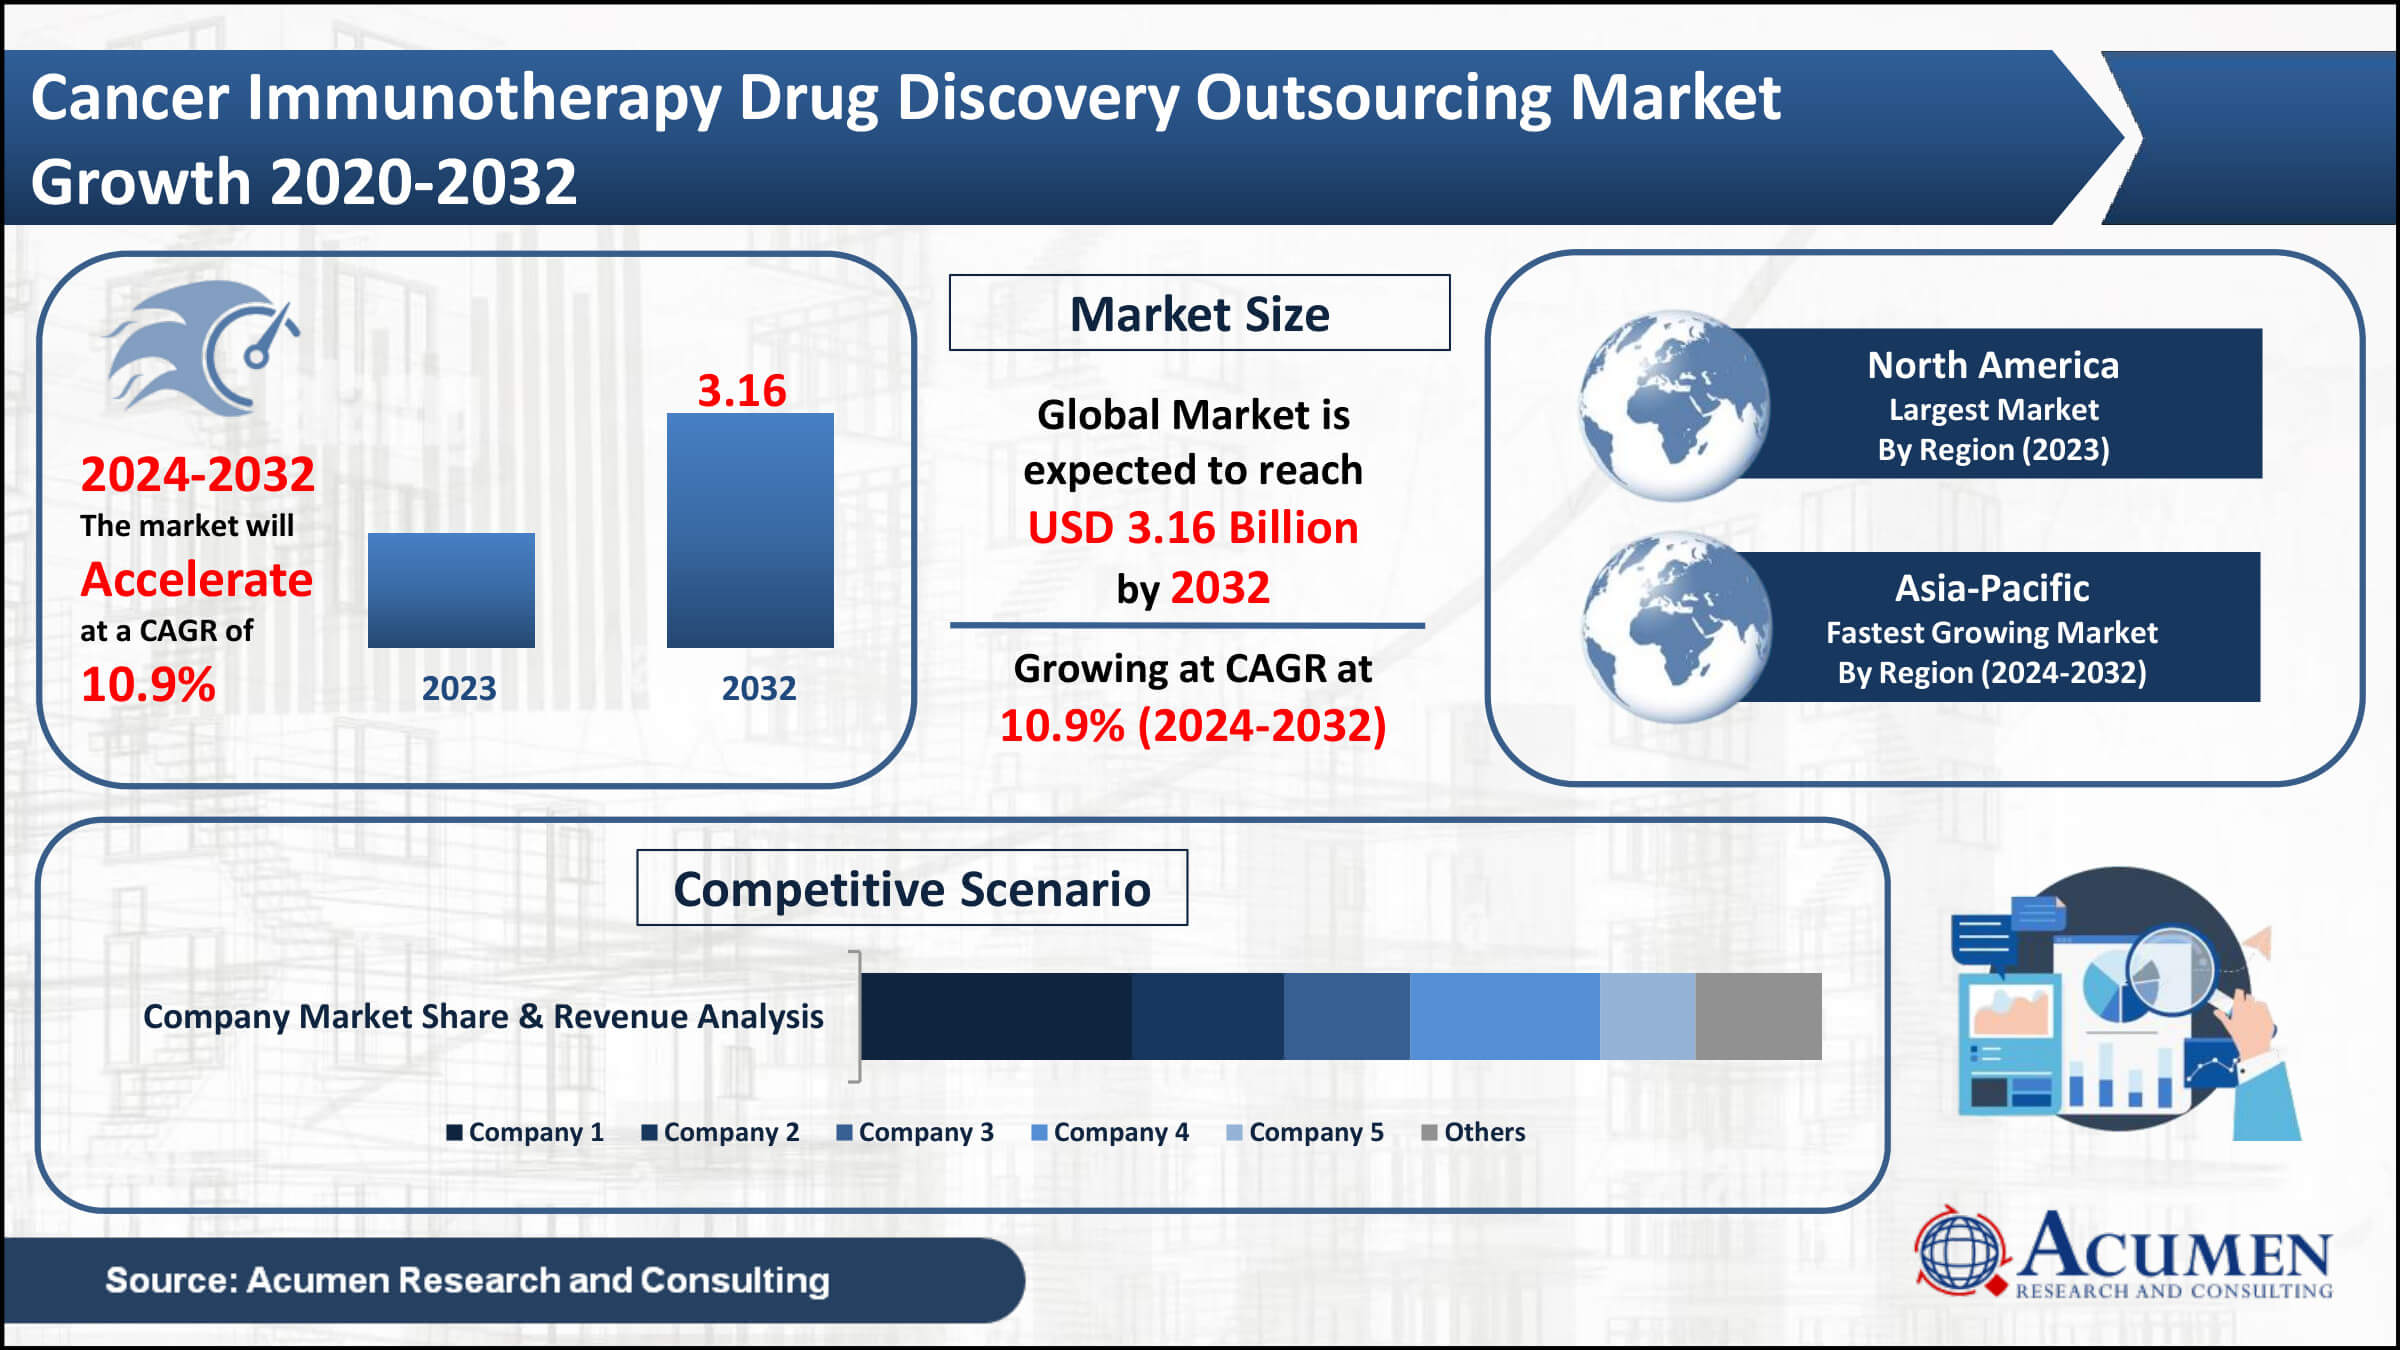 Cancer Immunotherapy Drug Discovery Outsourcing Market Trends